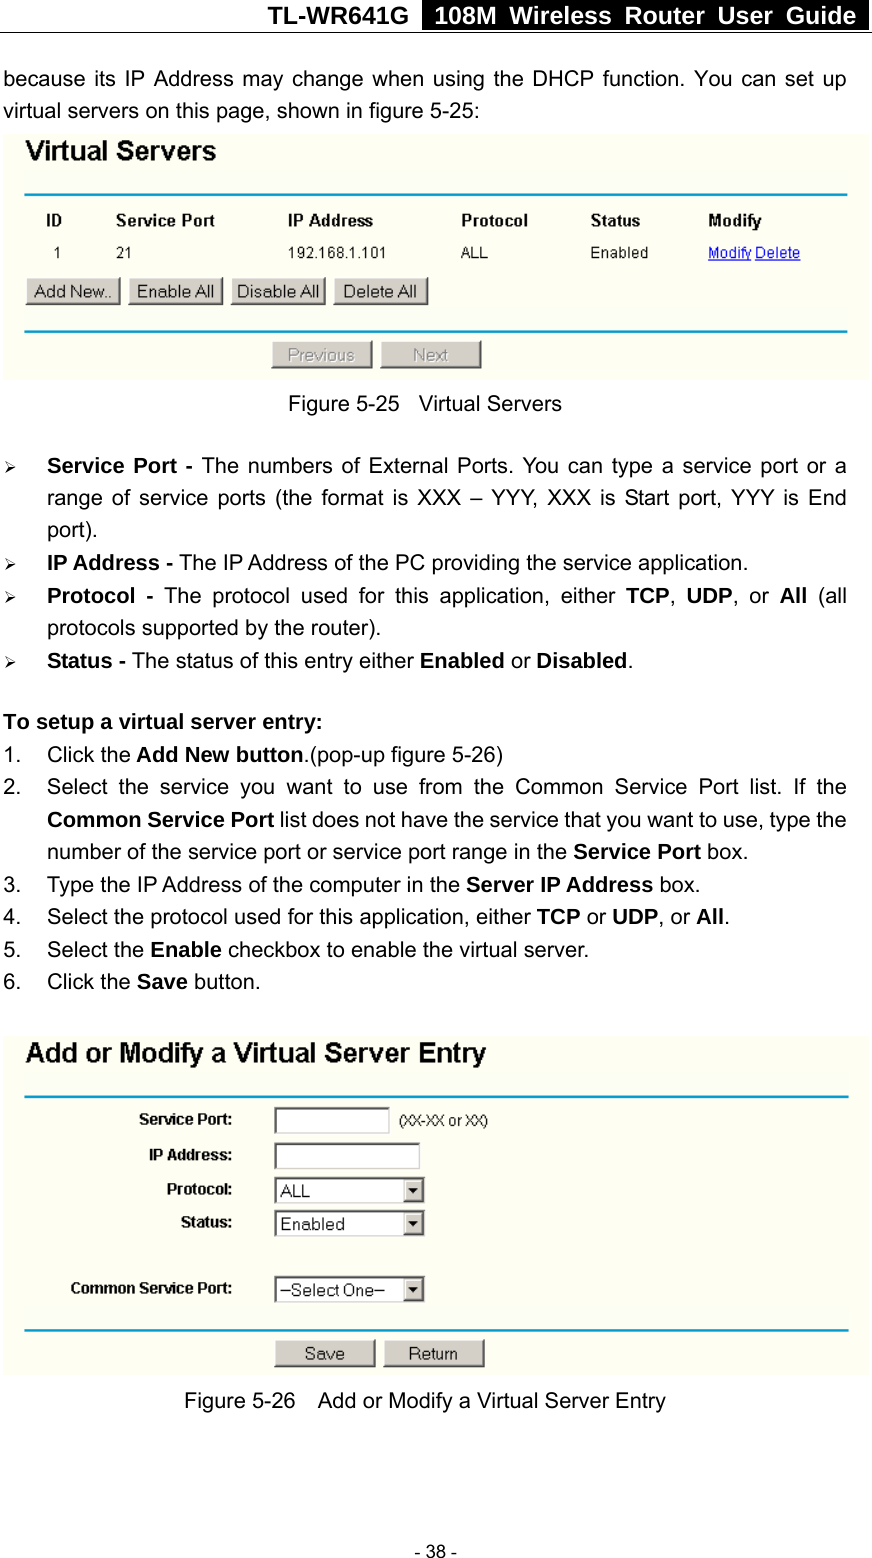 TL-WR641G   108M Wireless Router User Guide  because its IP Address may change when using the DHCP function. You can set up virtual servers on this page, shown in figure 5-25:  Figure 5-25  Virtual Servers ¾ Service Port - The numbers of External Ports. You can type a service port or a range of service ports (the format is XXX – YYY, XXX is Start port, YYY is End port).  ¾ IP Address - The IP Address of the PC providing the service application. ¾ Protocol - The protocol used for this application, either TCP,  UDP, or All  (all protocols supported by the router). ¾ Status - The status of this entry either Enabled or Disabled. To setup a virtual server entry:   1. Click the Add New button.(pop-up figure 5-26) 2.  Select the service you want to use from the Common Service Port list. If the Common Service Port list does not have the service that you want to use, type the number of the service port or service port range in the Service Port box. 3.  Type the IP Address of the computer in the Server IP Address box.  4.  Select the protocol used for this application, either TCP or UDP, or All. 5. Select the Enable checkbox to enable the virtual server. 6. Click the Save button.    Figure 5-26    Add or Modify a Virtual Server Entry  - 38 - 